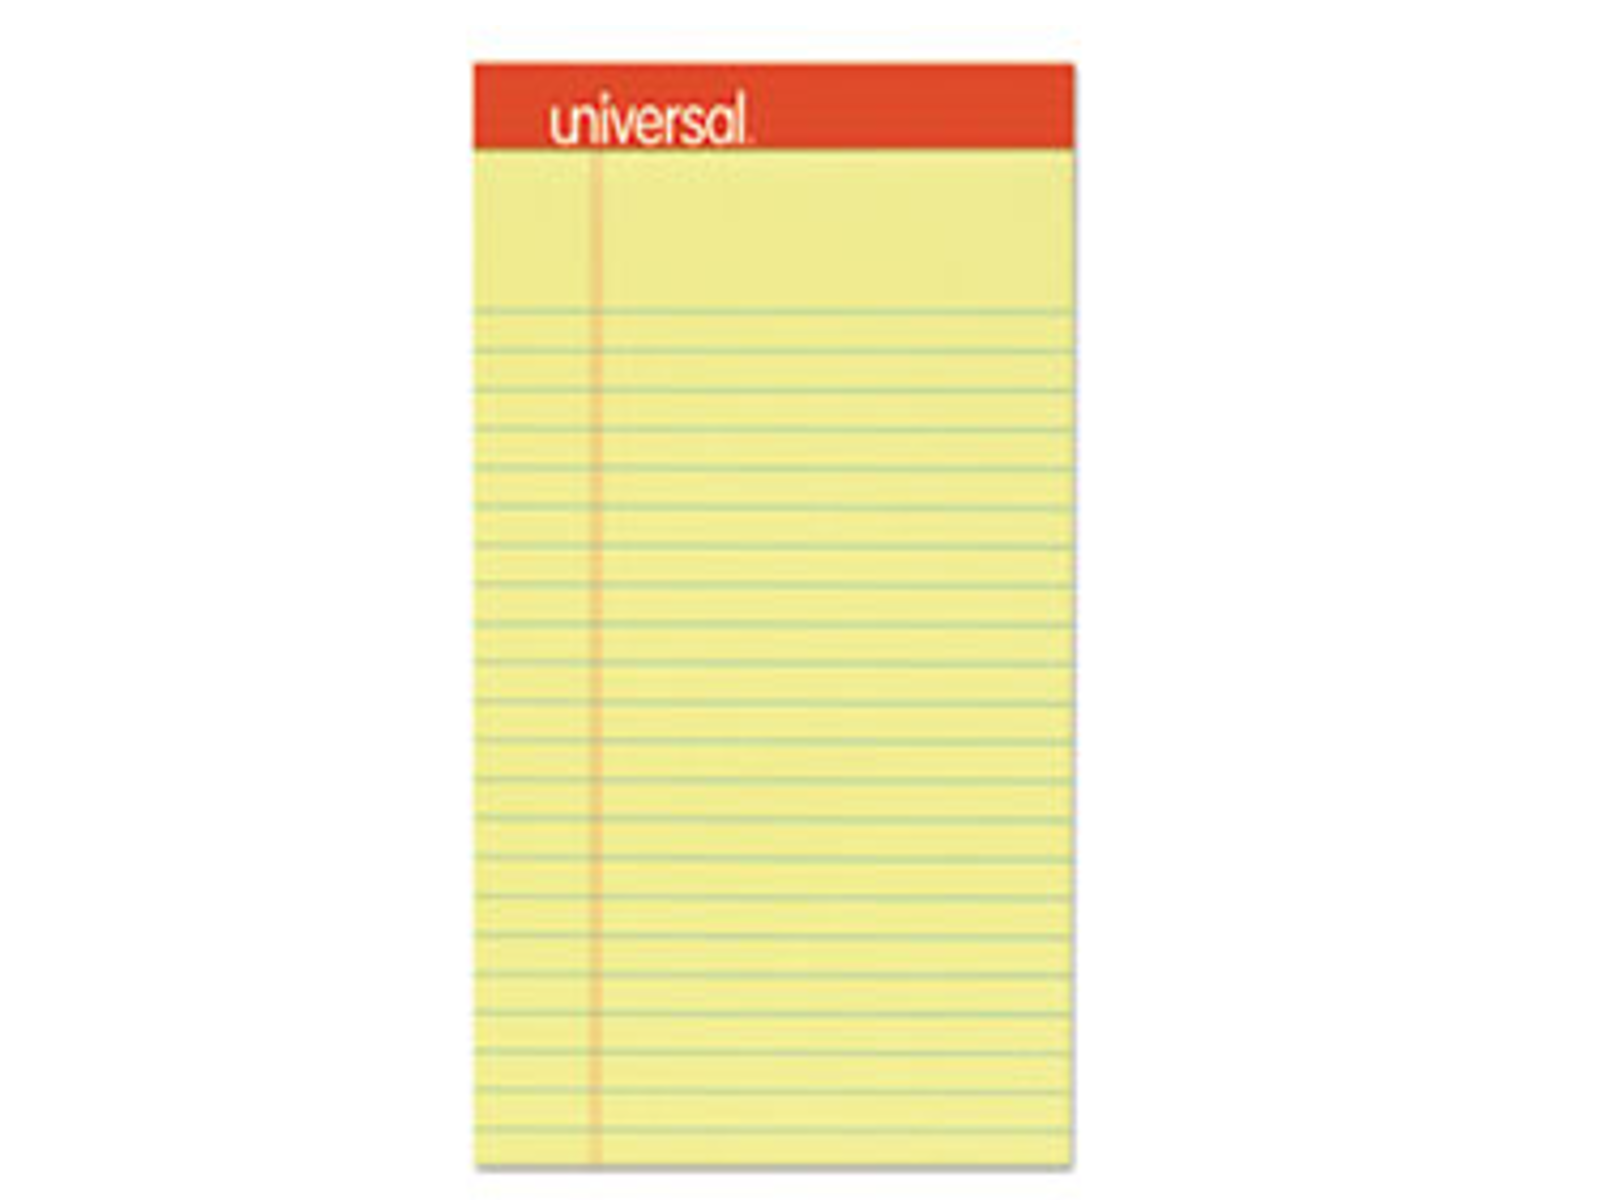 UNIVERSAL OFFICE PERFORATED
RULED WRITING PADS, NARROW
RULE 5 X 8, CANARY, 50 SHEETS,
1/DOZEN